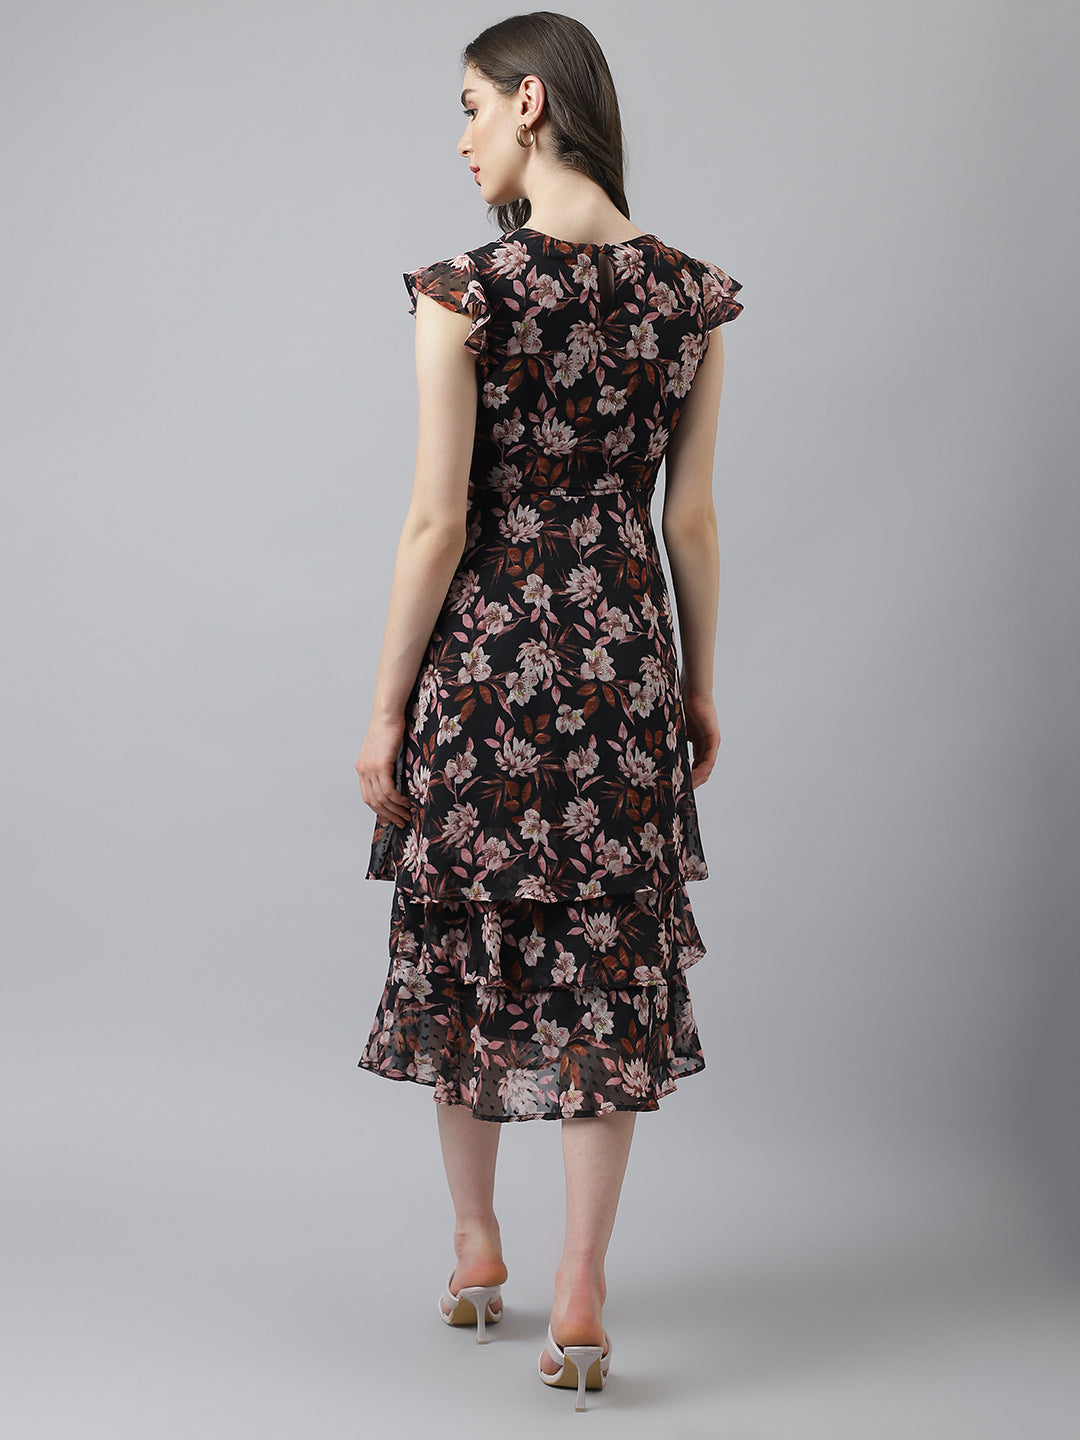 Black Flower Print A-Line Dress With Cap Sleeves